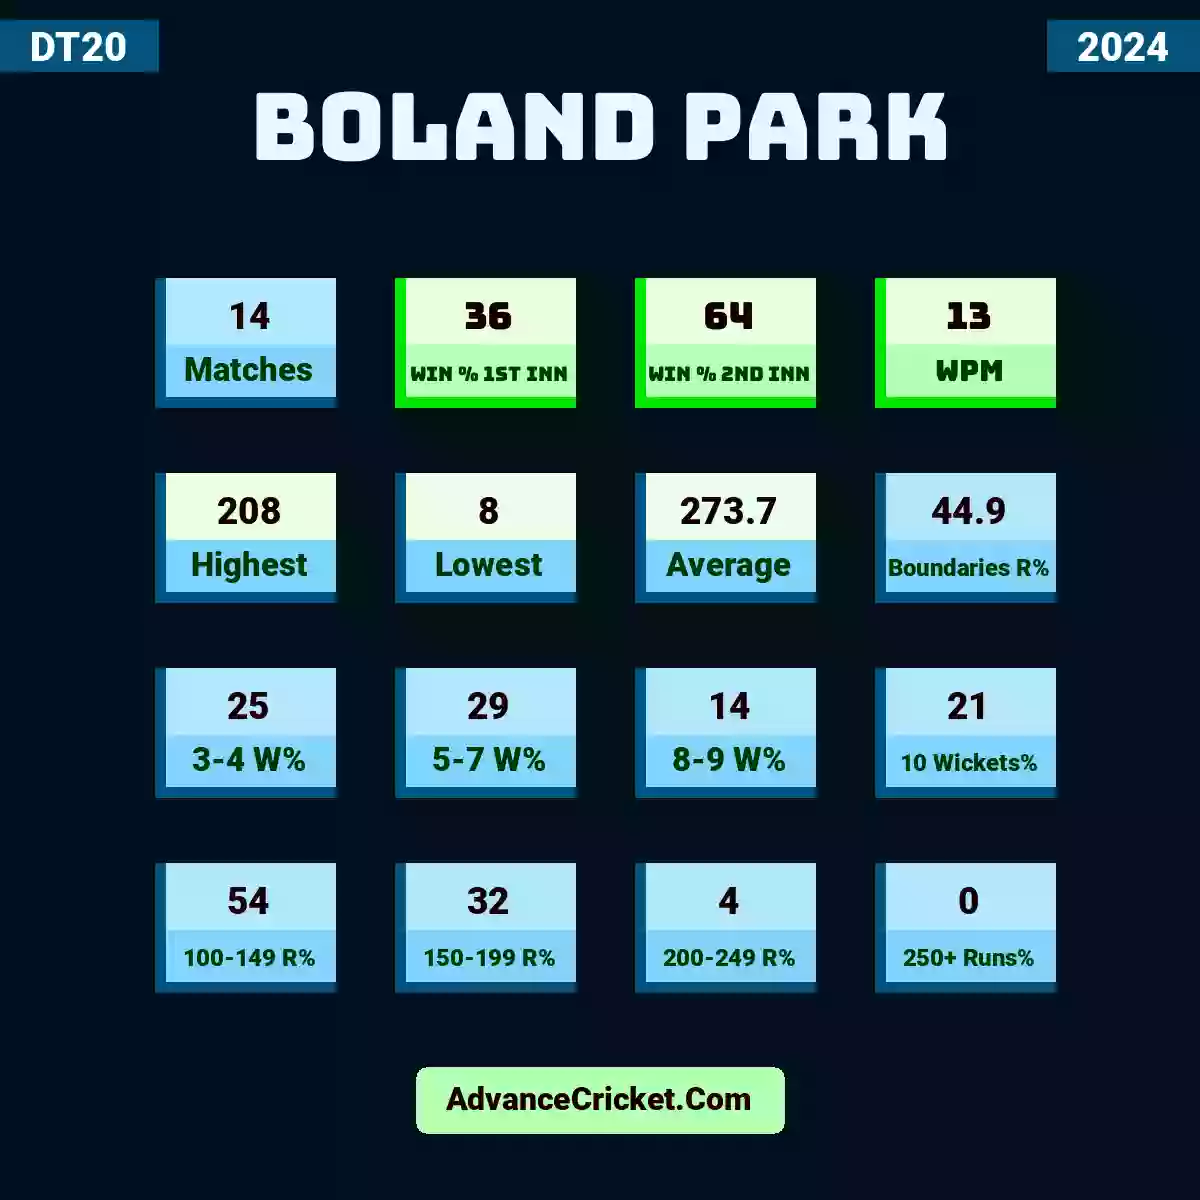 Image showing Boland Park DT20 2024 with Matches: 14, Win % 1st Inn: 36, Win % 2nd Inn: 64, WPM: 13, Highest: 208, Lowest: 8, Average: 273.7, Boundaries R%: 44.9, 3-4 W%: 25, 5-7 W%: 29, 8-9 W%: 14, 10 Wickets%: 21, 100-149 R%: 54, 150-199 R%: 32, 200-249 R%: 4, 250+ Runs%: 0.